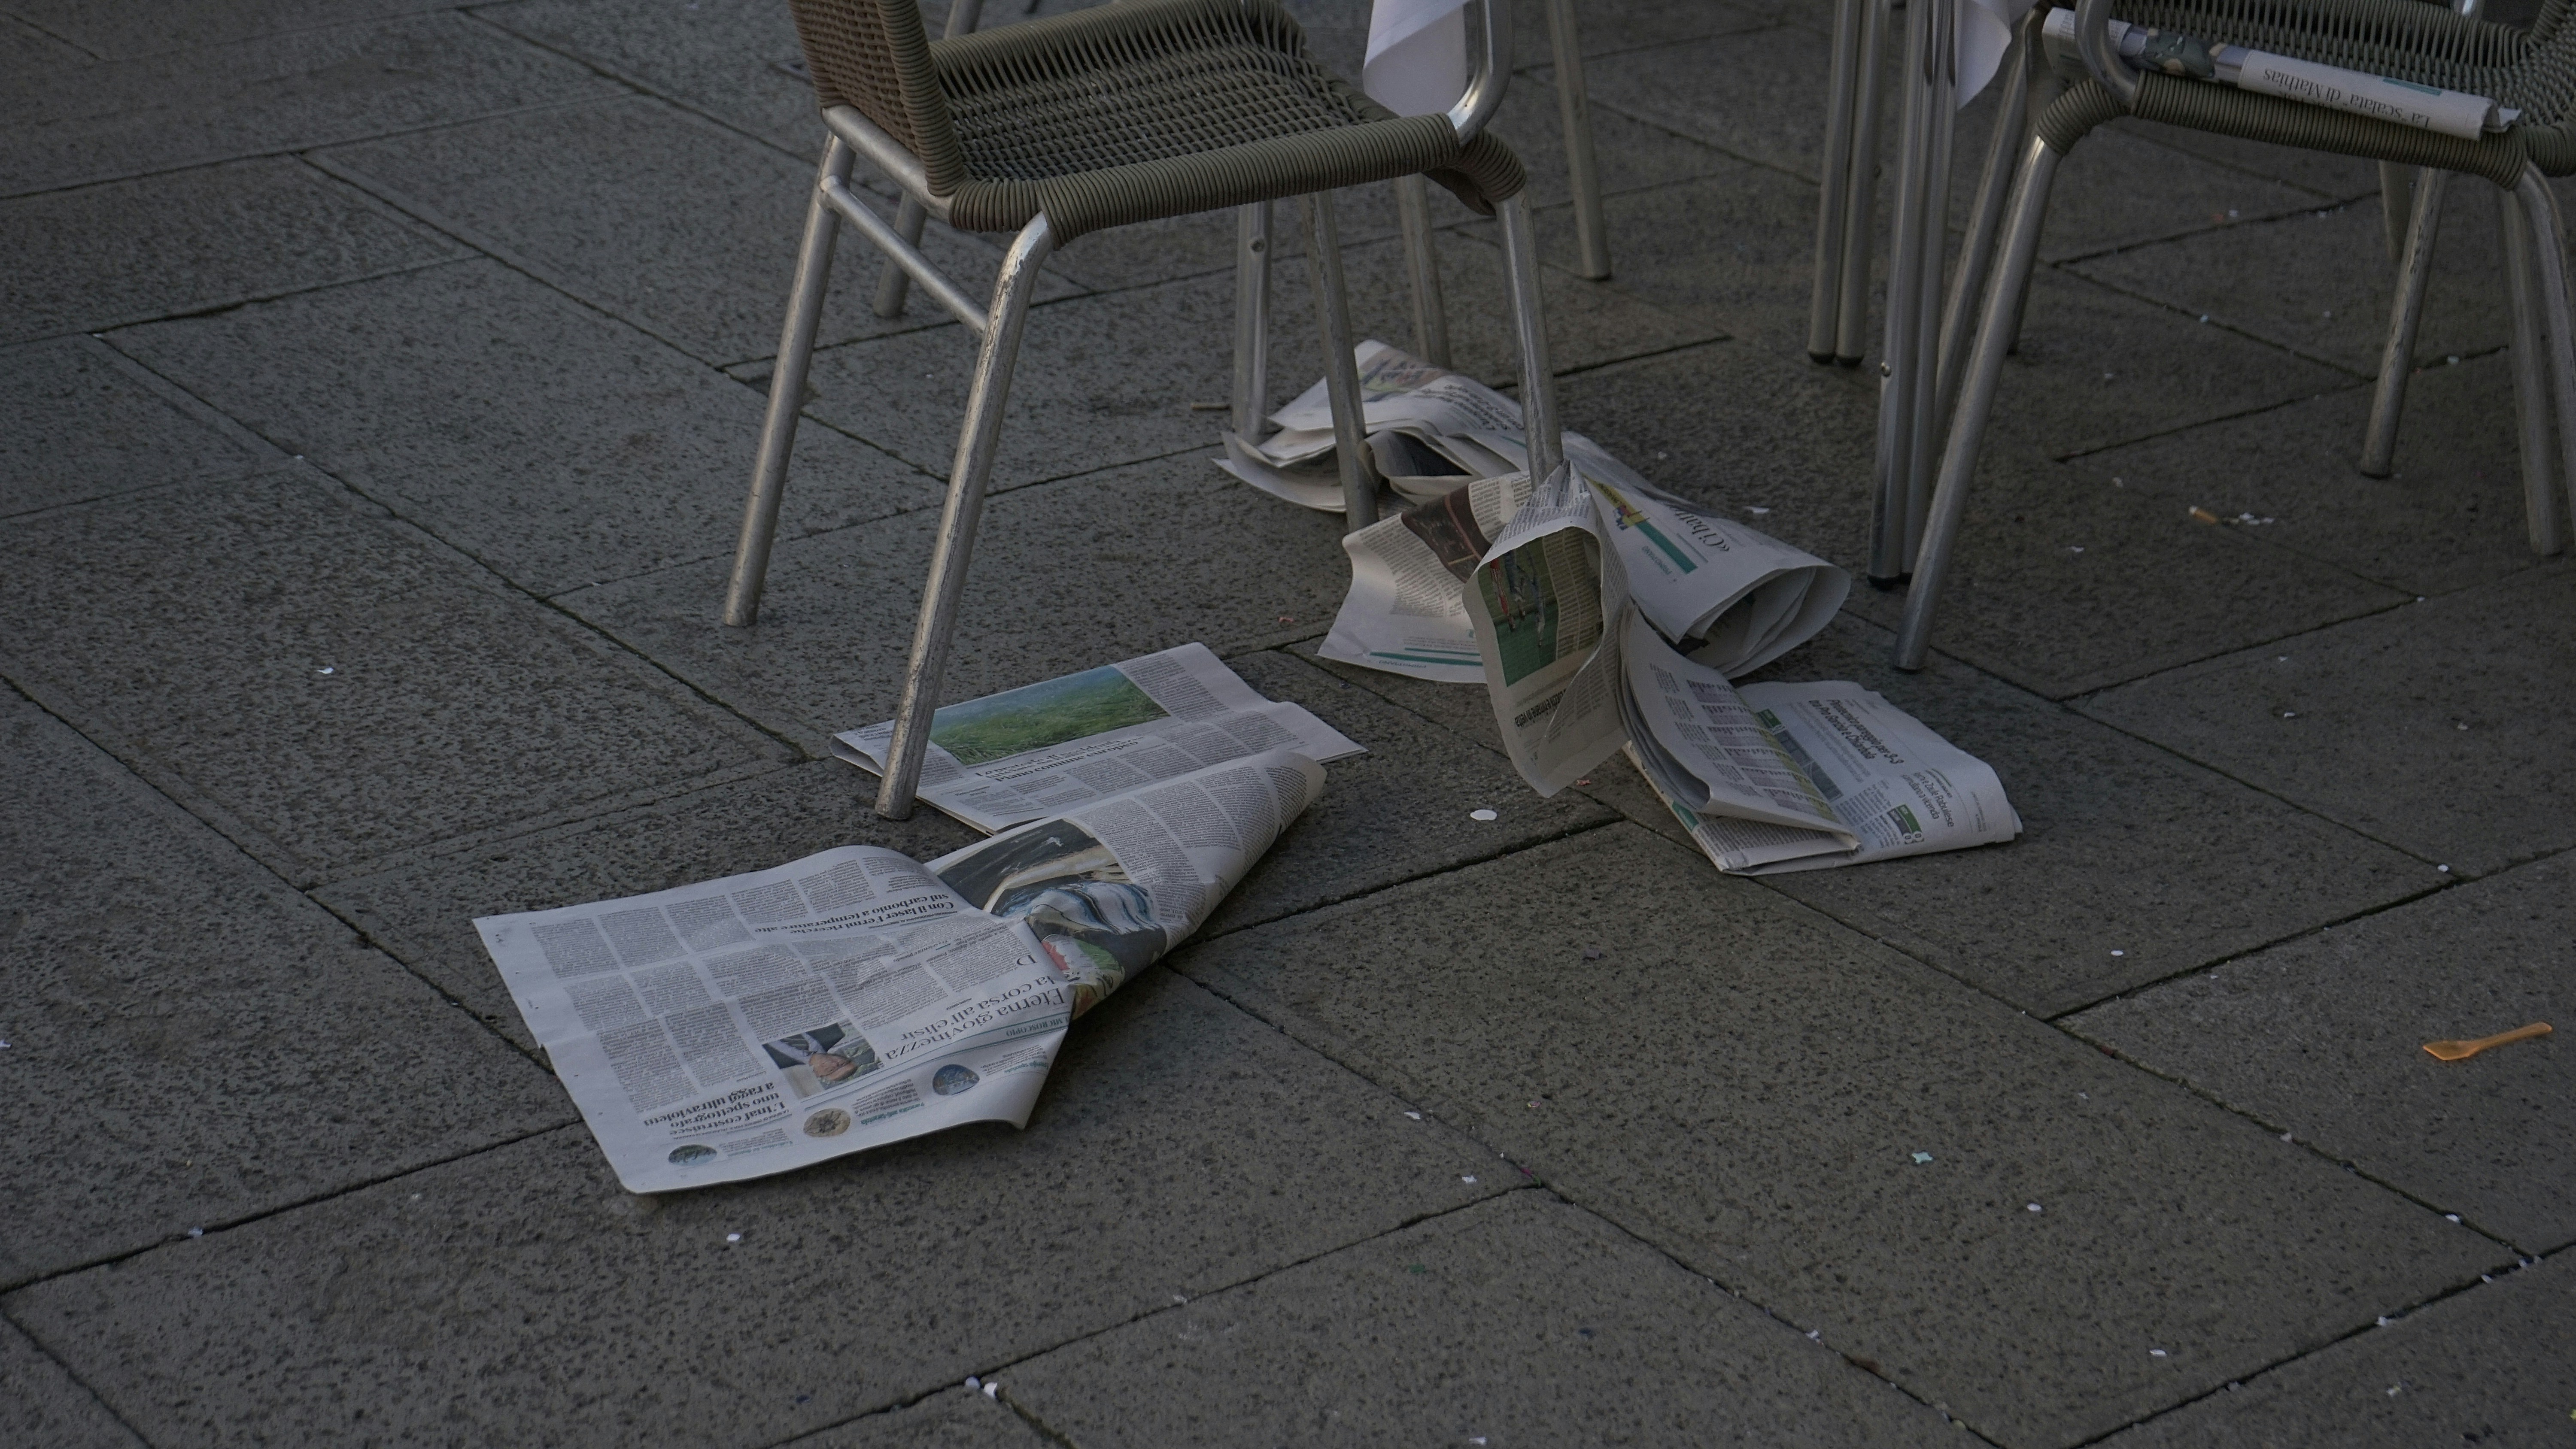 a newspaper laying on the ground next to chairs